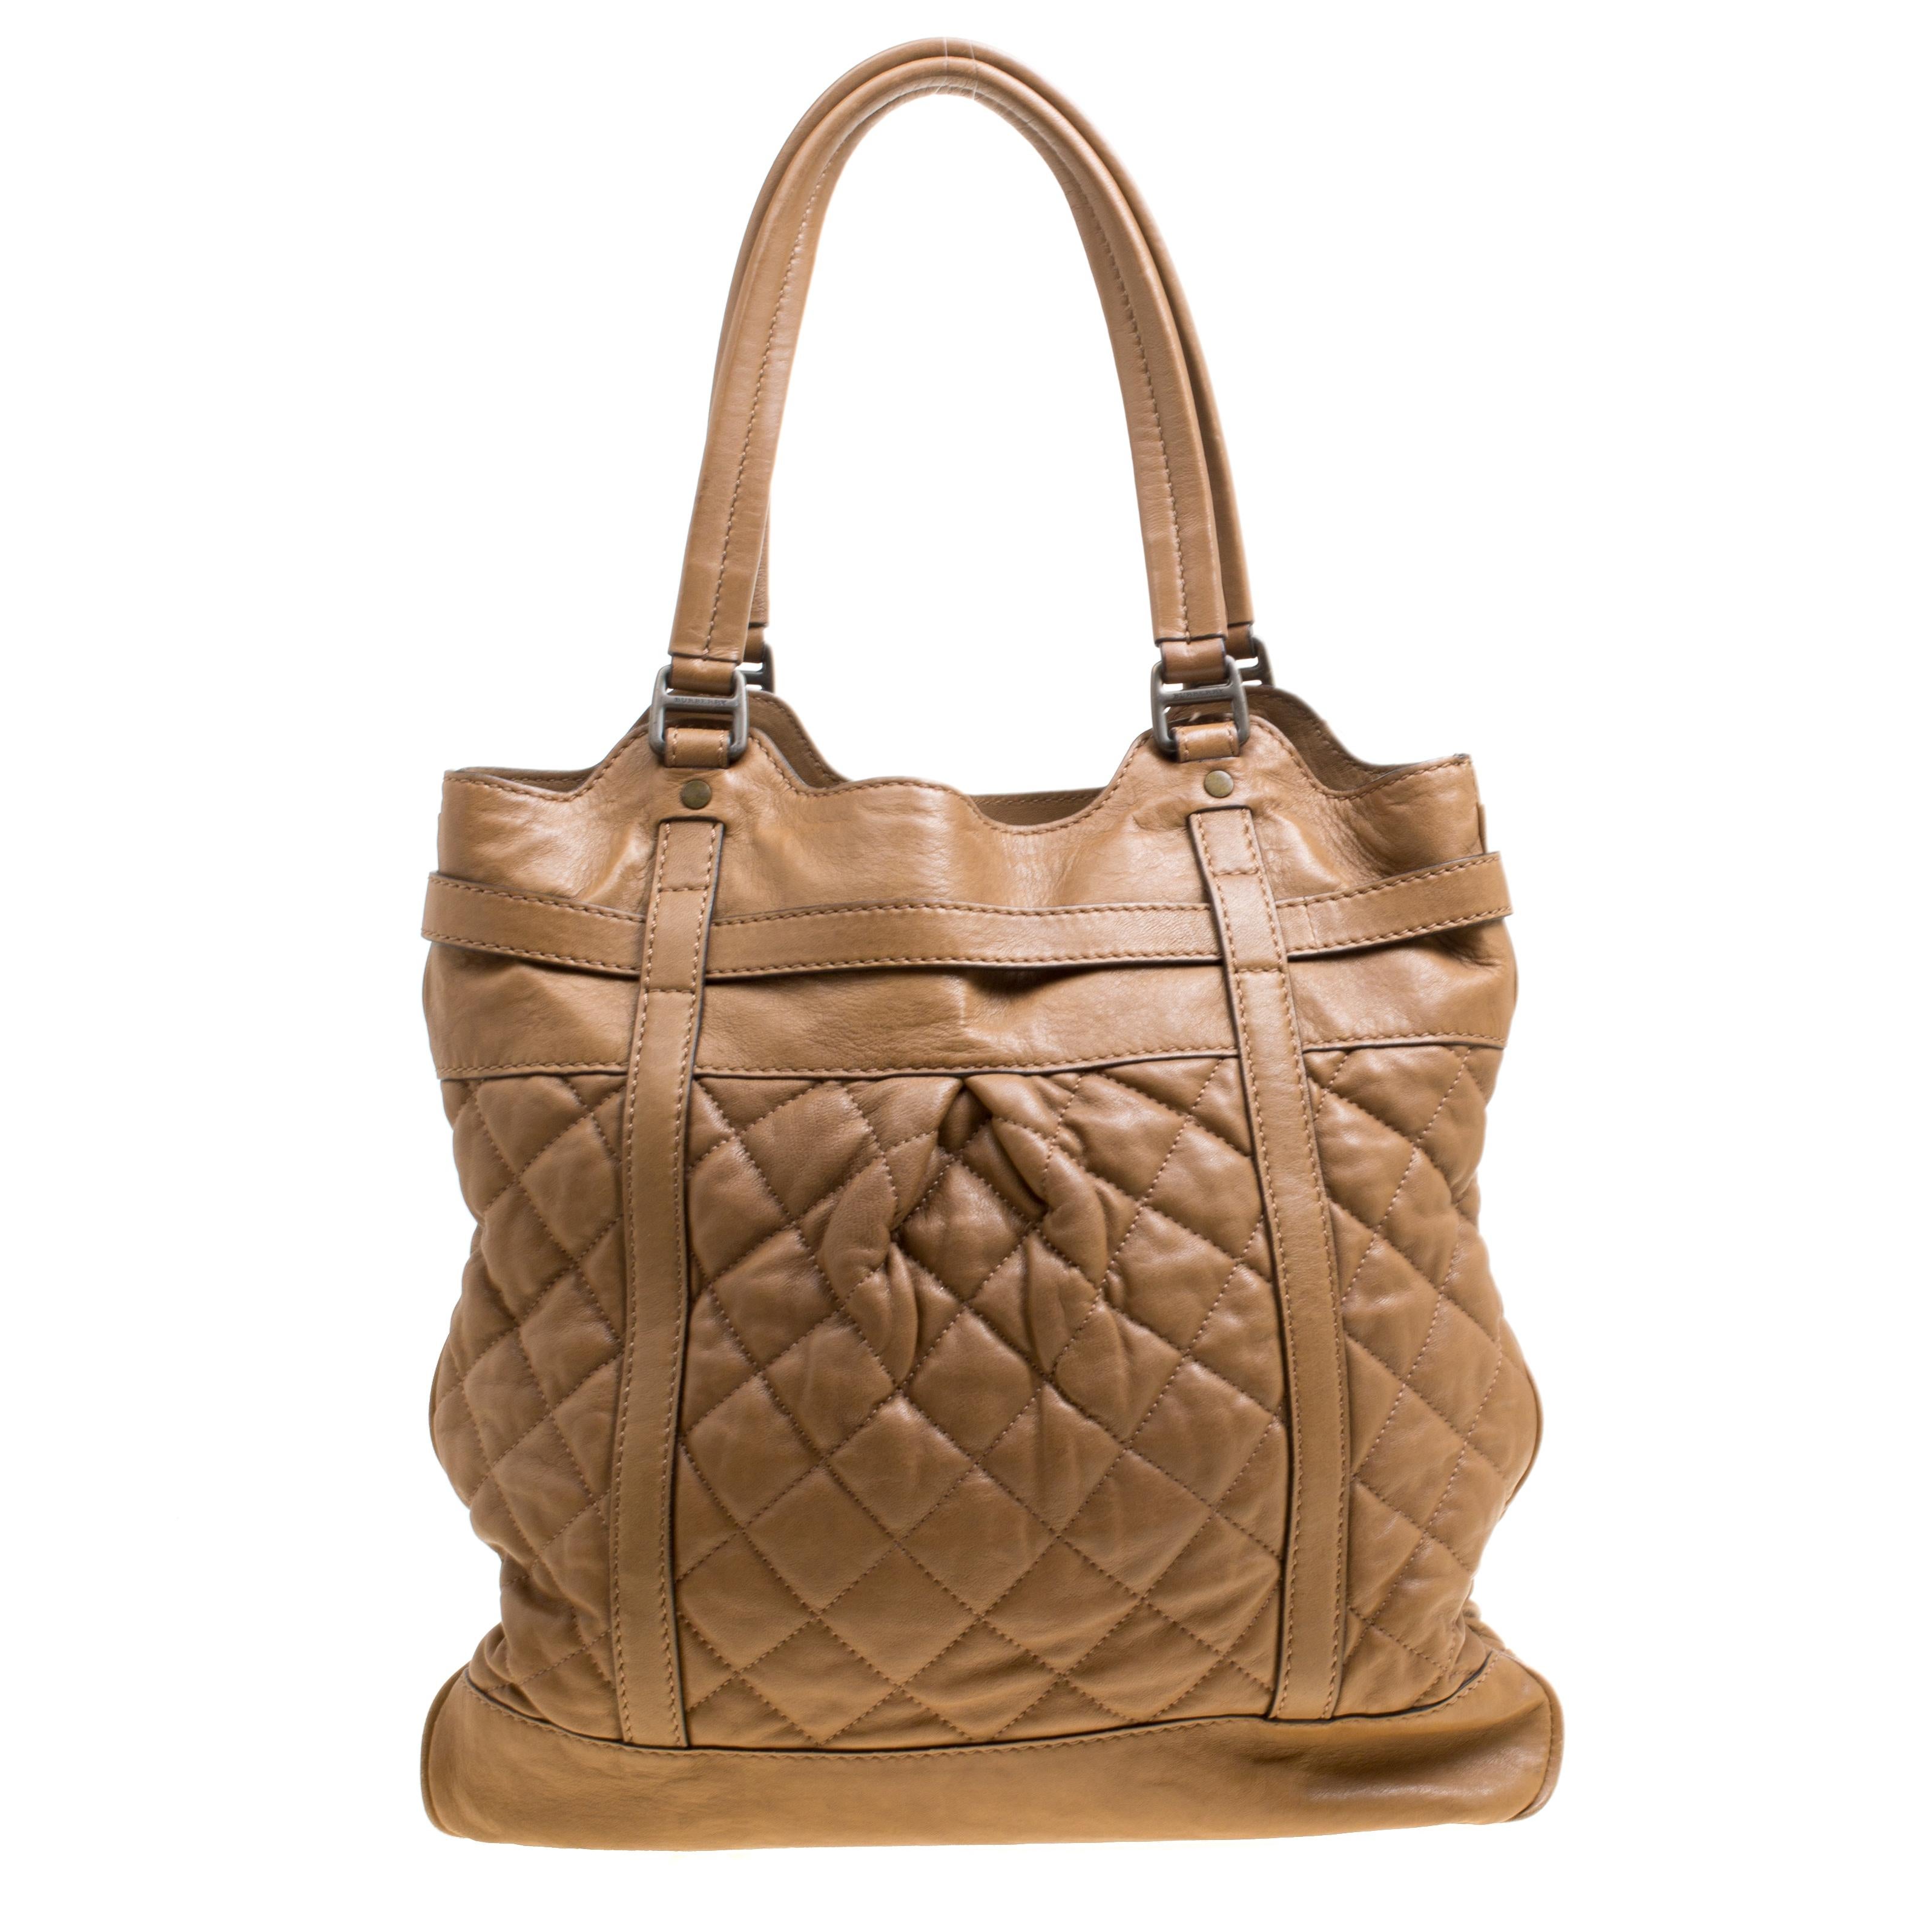 This beautiful, brown Burberry beauty will give your look a touch of class and elegance. It is crafted from leather and is adorned with a quilted pattern along with a buckled belt strap on the front. The well-designed exterior is coupled with